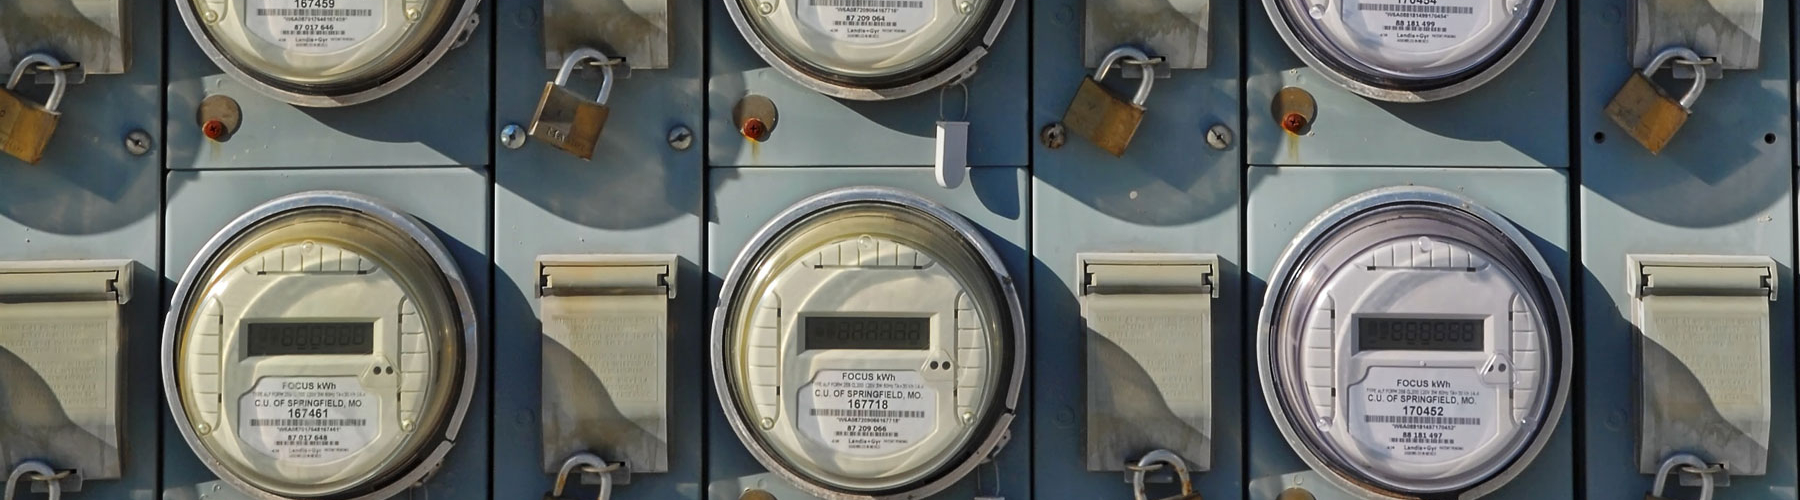 multiple electricity meters on a wall